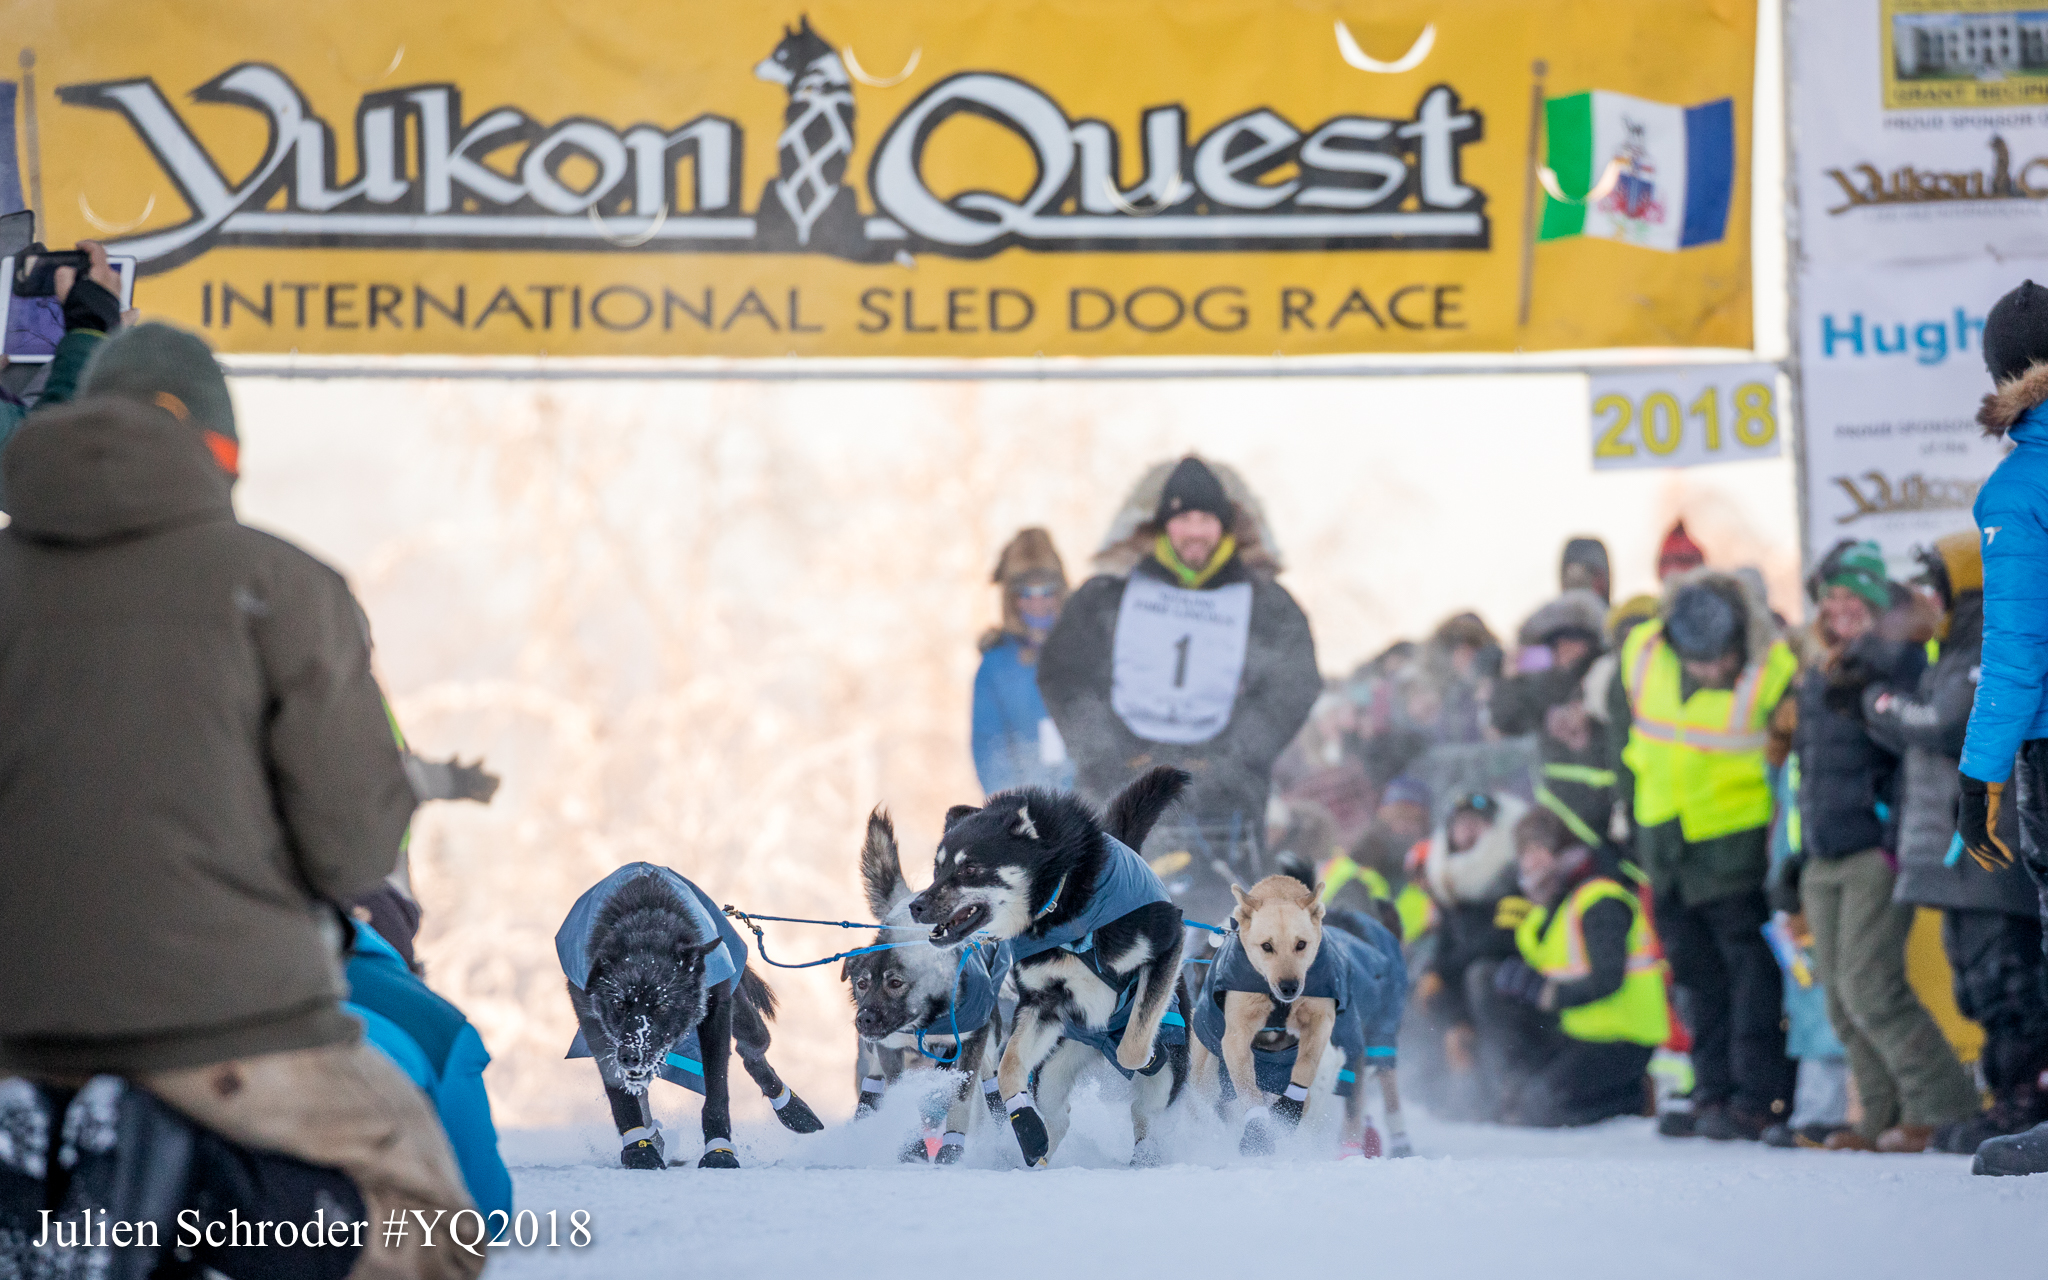 Yukon Quest Banner posted over a sled dog team pulling a musher at start of a race in sub-zero temps with spectators on the sidelines